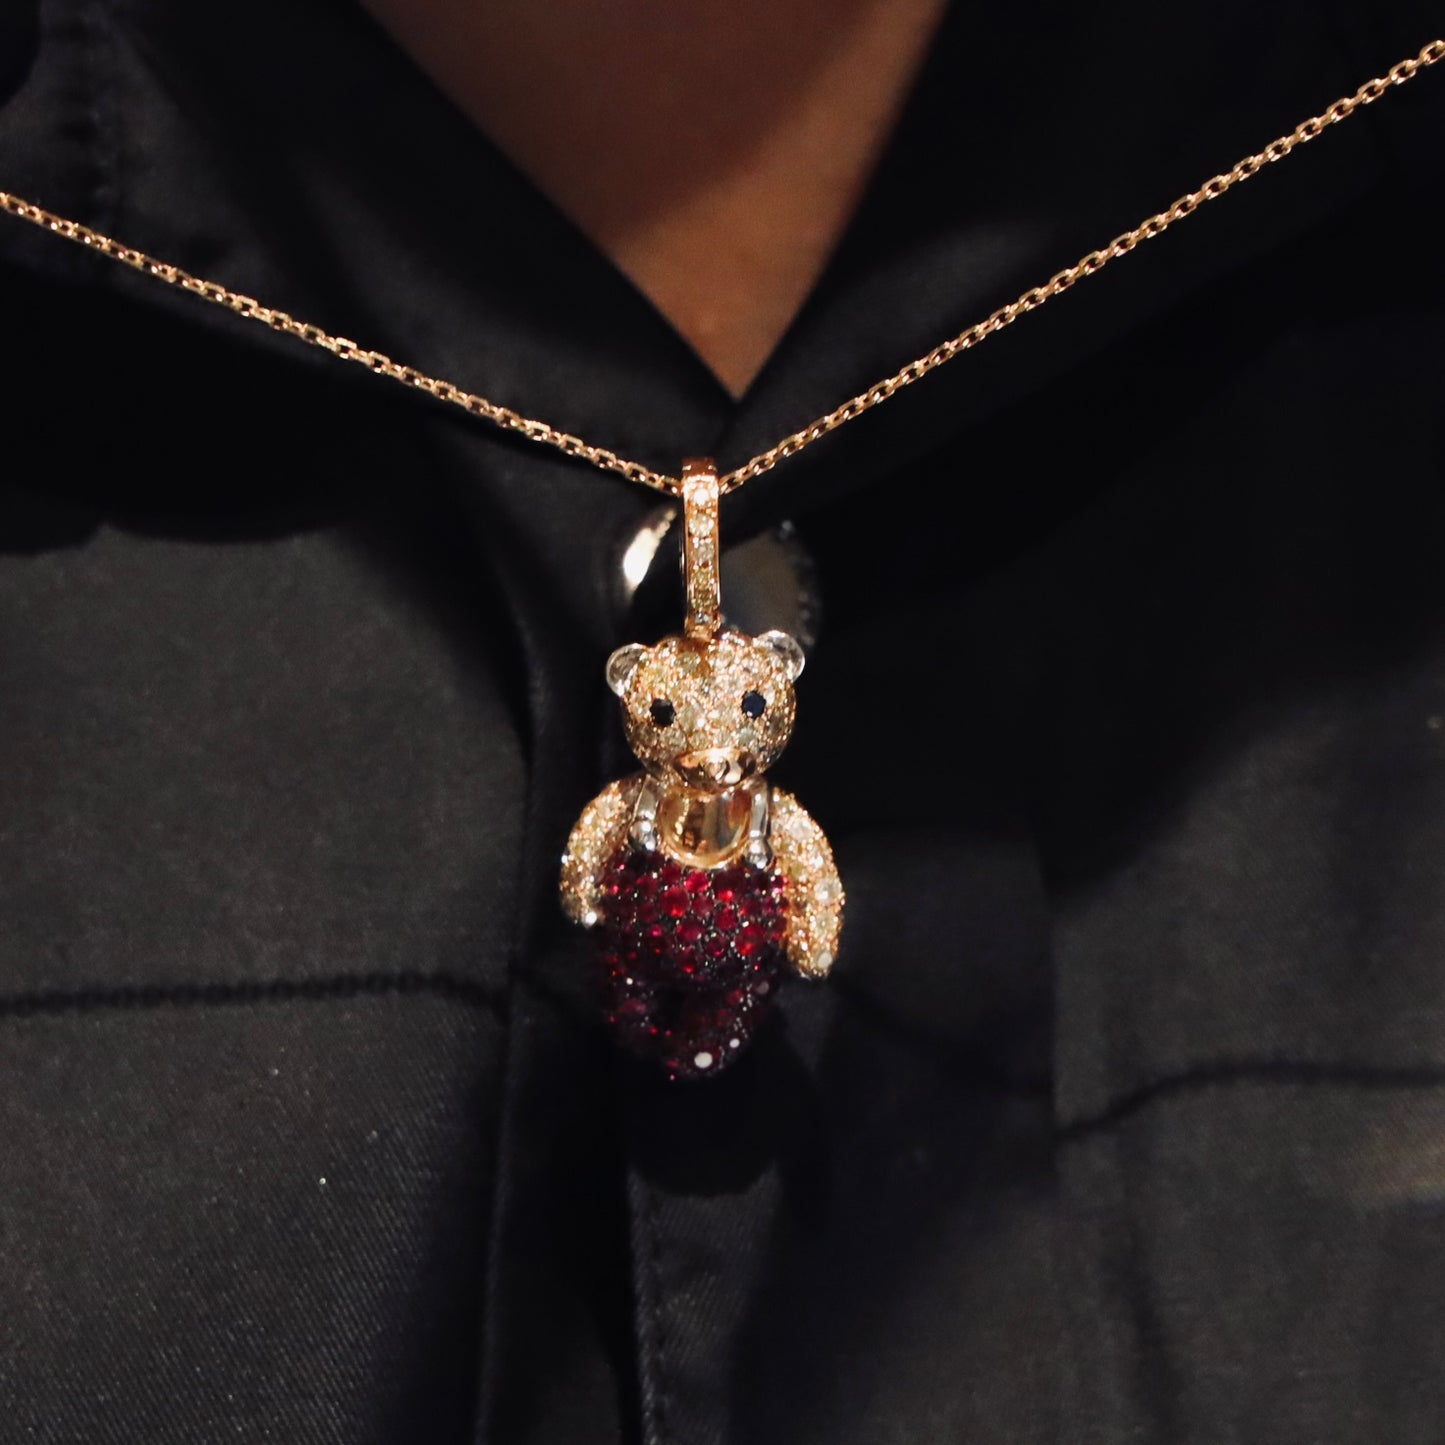 18K Gold Bear Necklace with Diamonds and Rubies